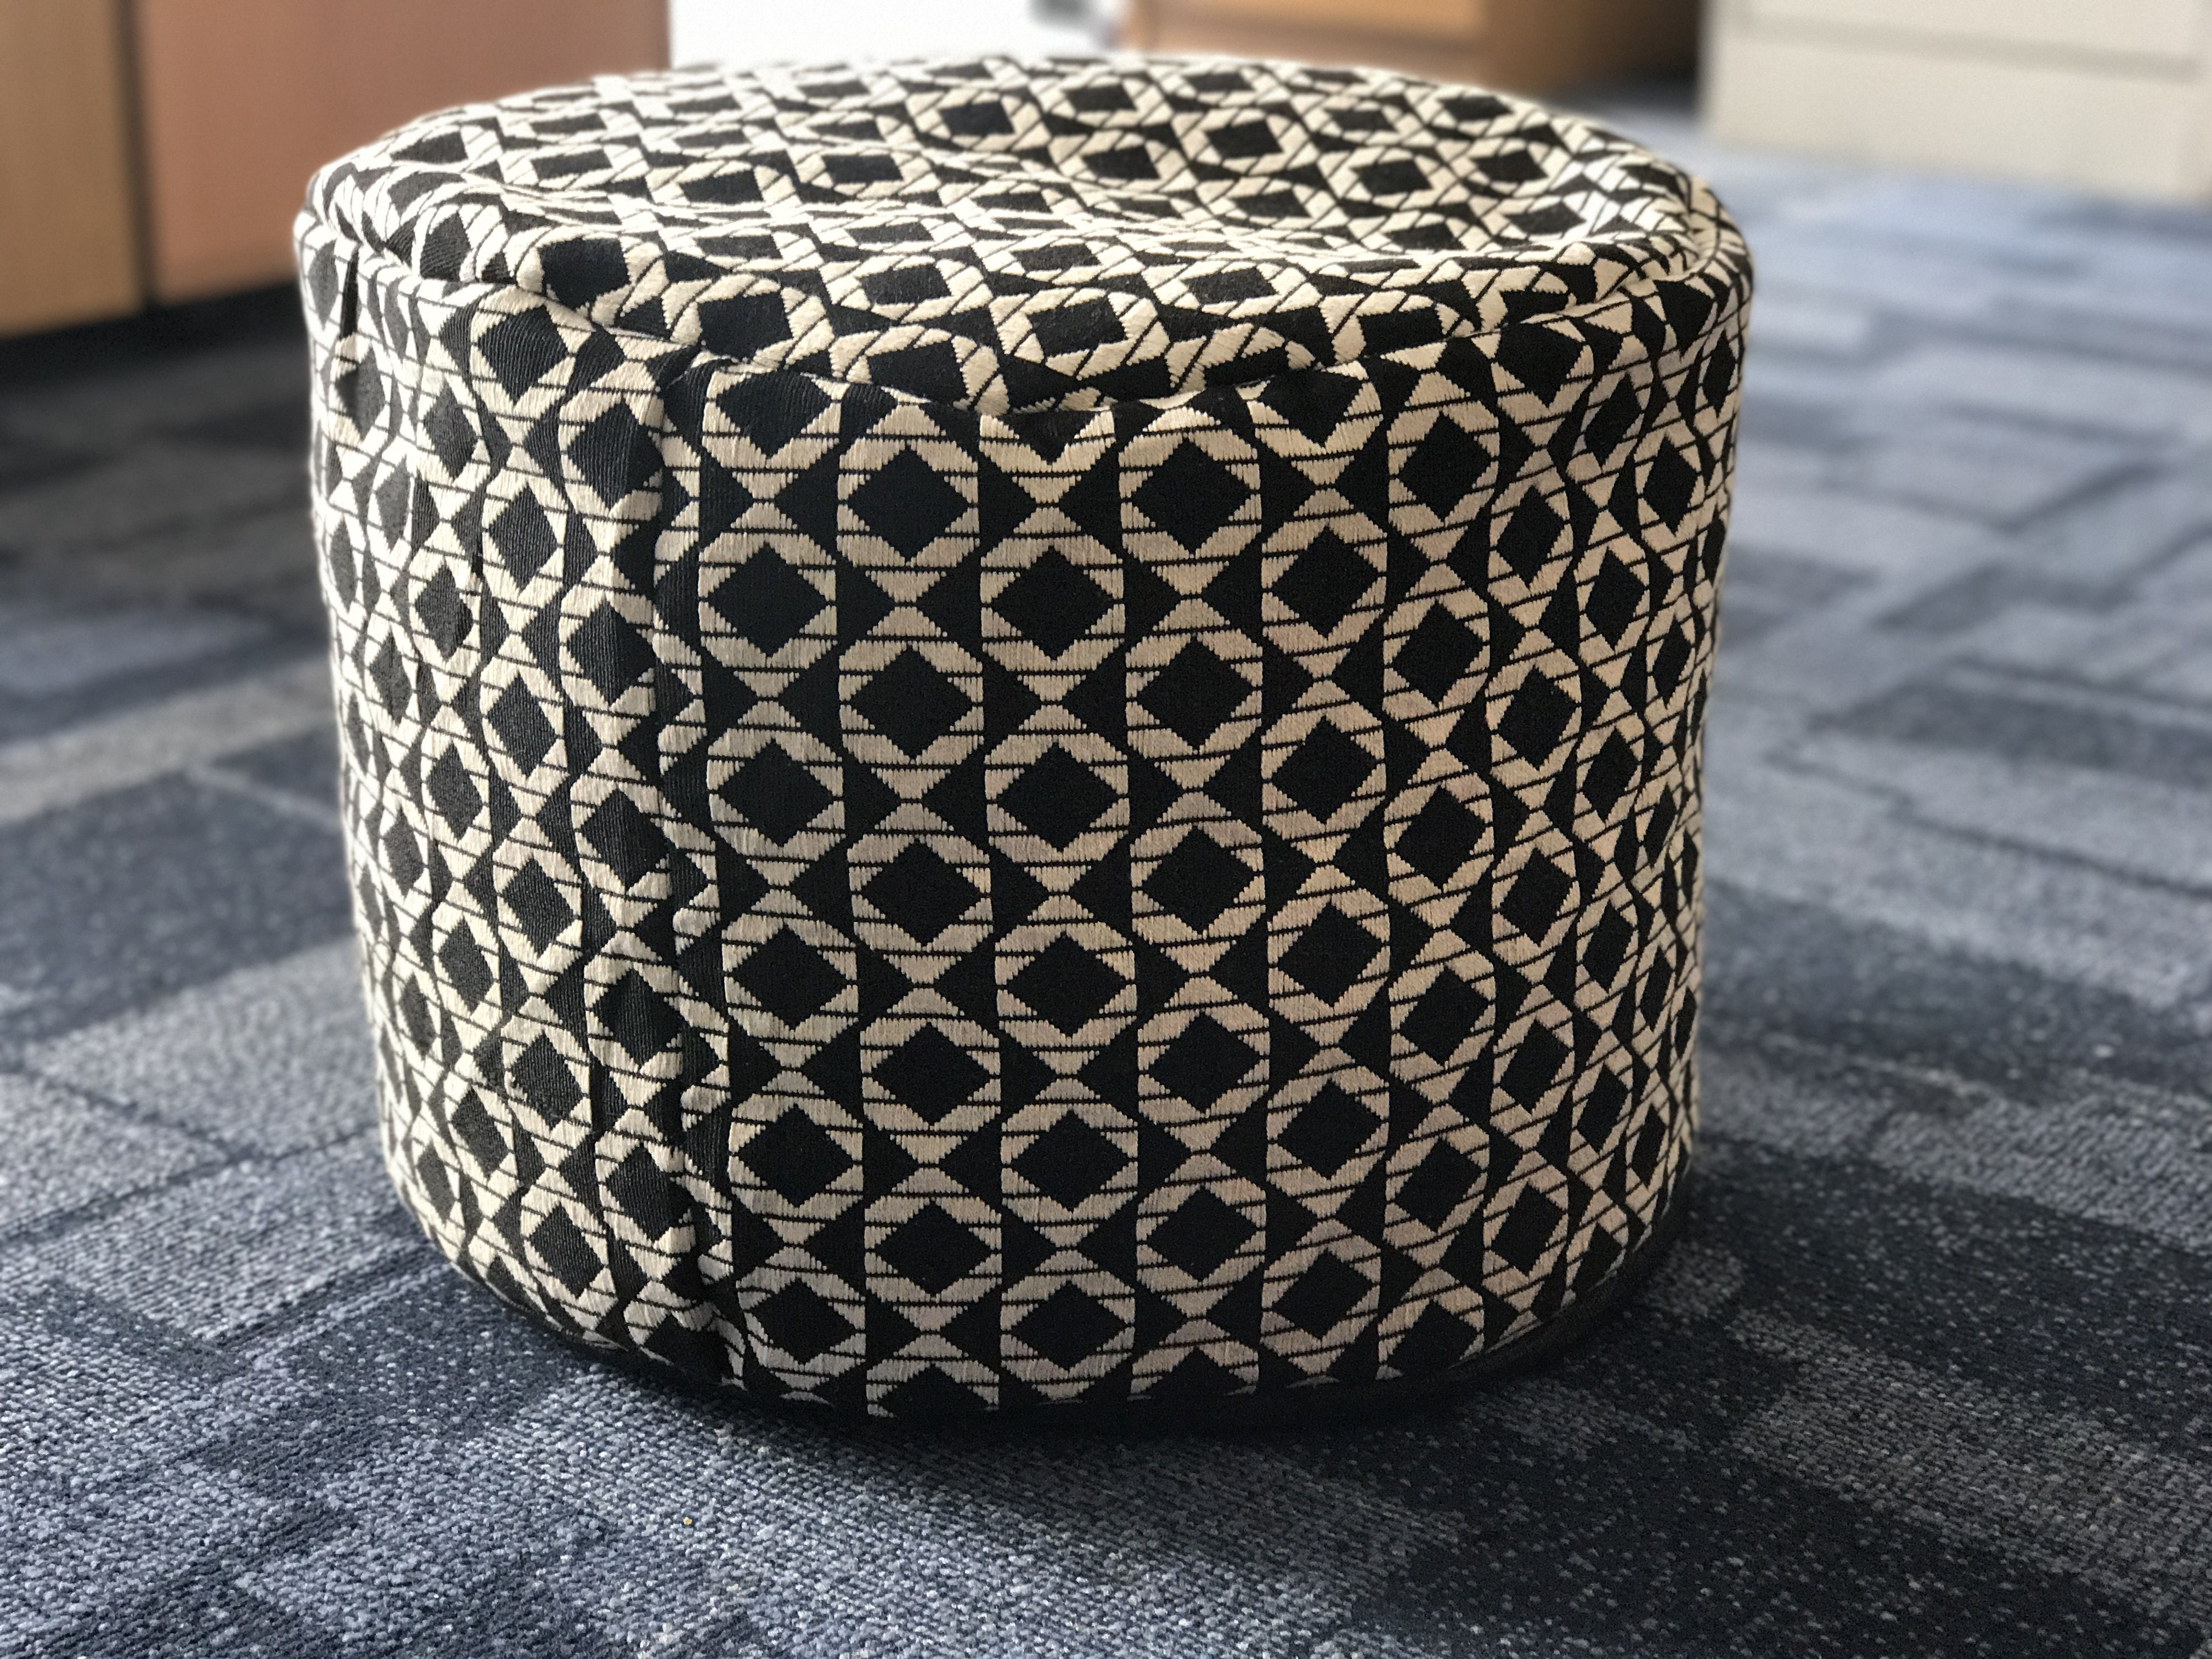 Design Cube Footstool From Bm Bargains Great Geometric pertaining to proportions 4032 X 3024